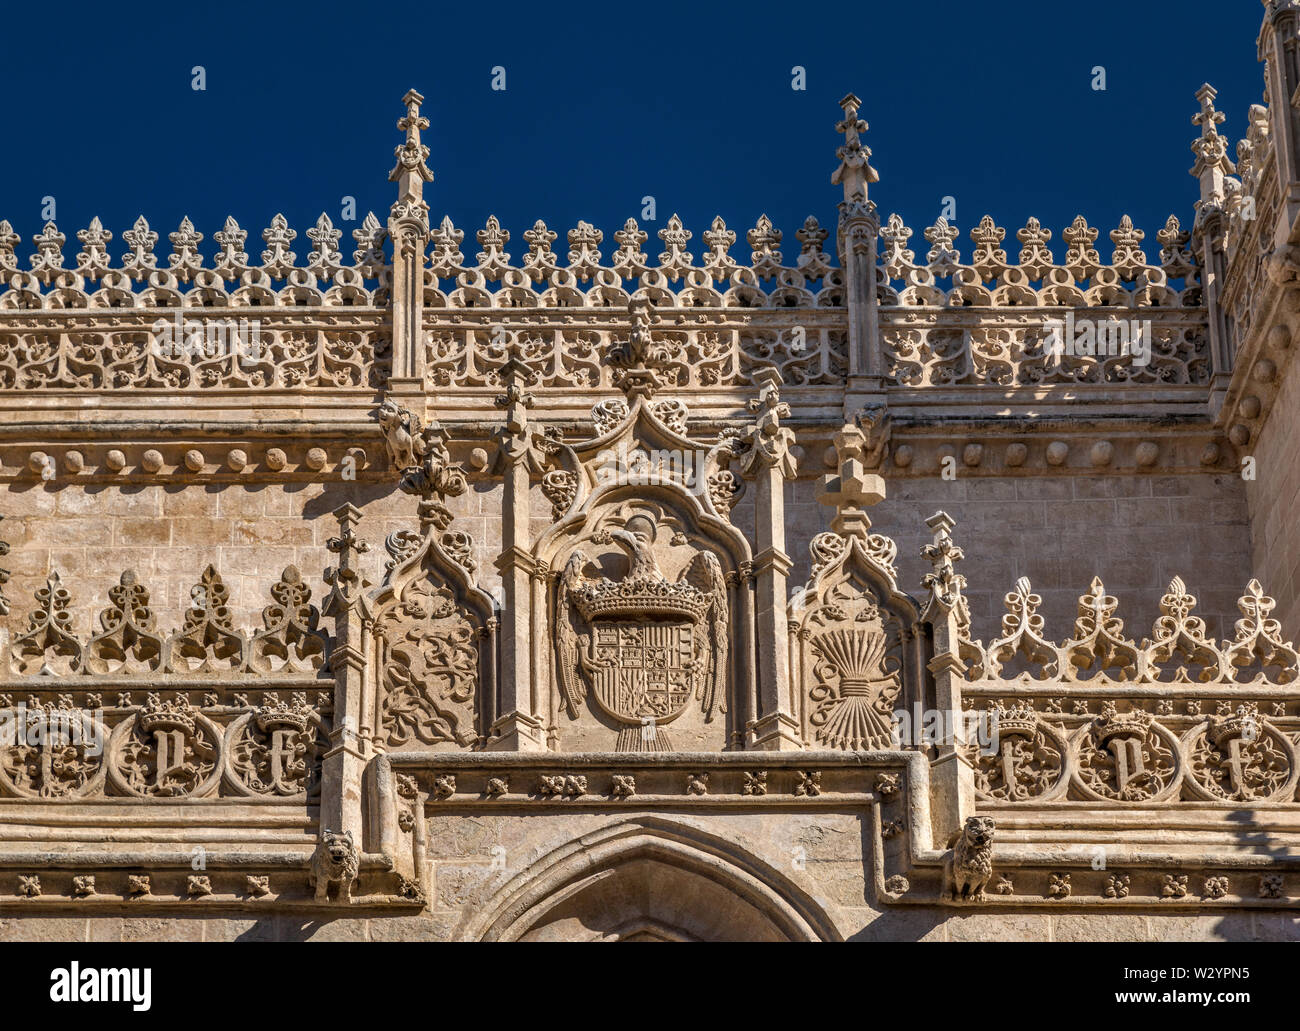 Carvings at facade of Capilla Real, Renaissance style, 16th century, Cathedral Quarter in Granada, Andalusia, Spain Stock Photo